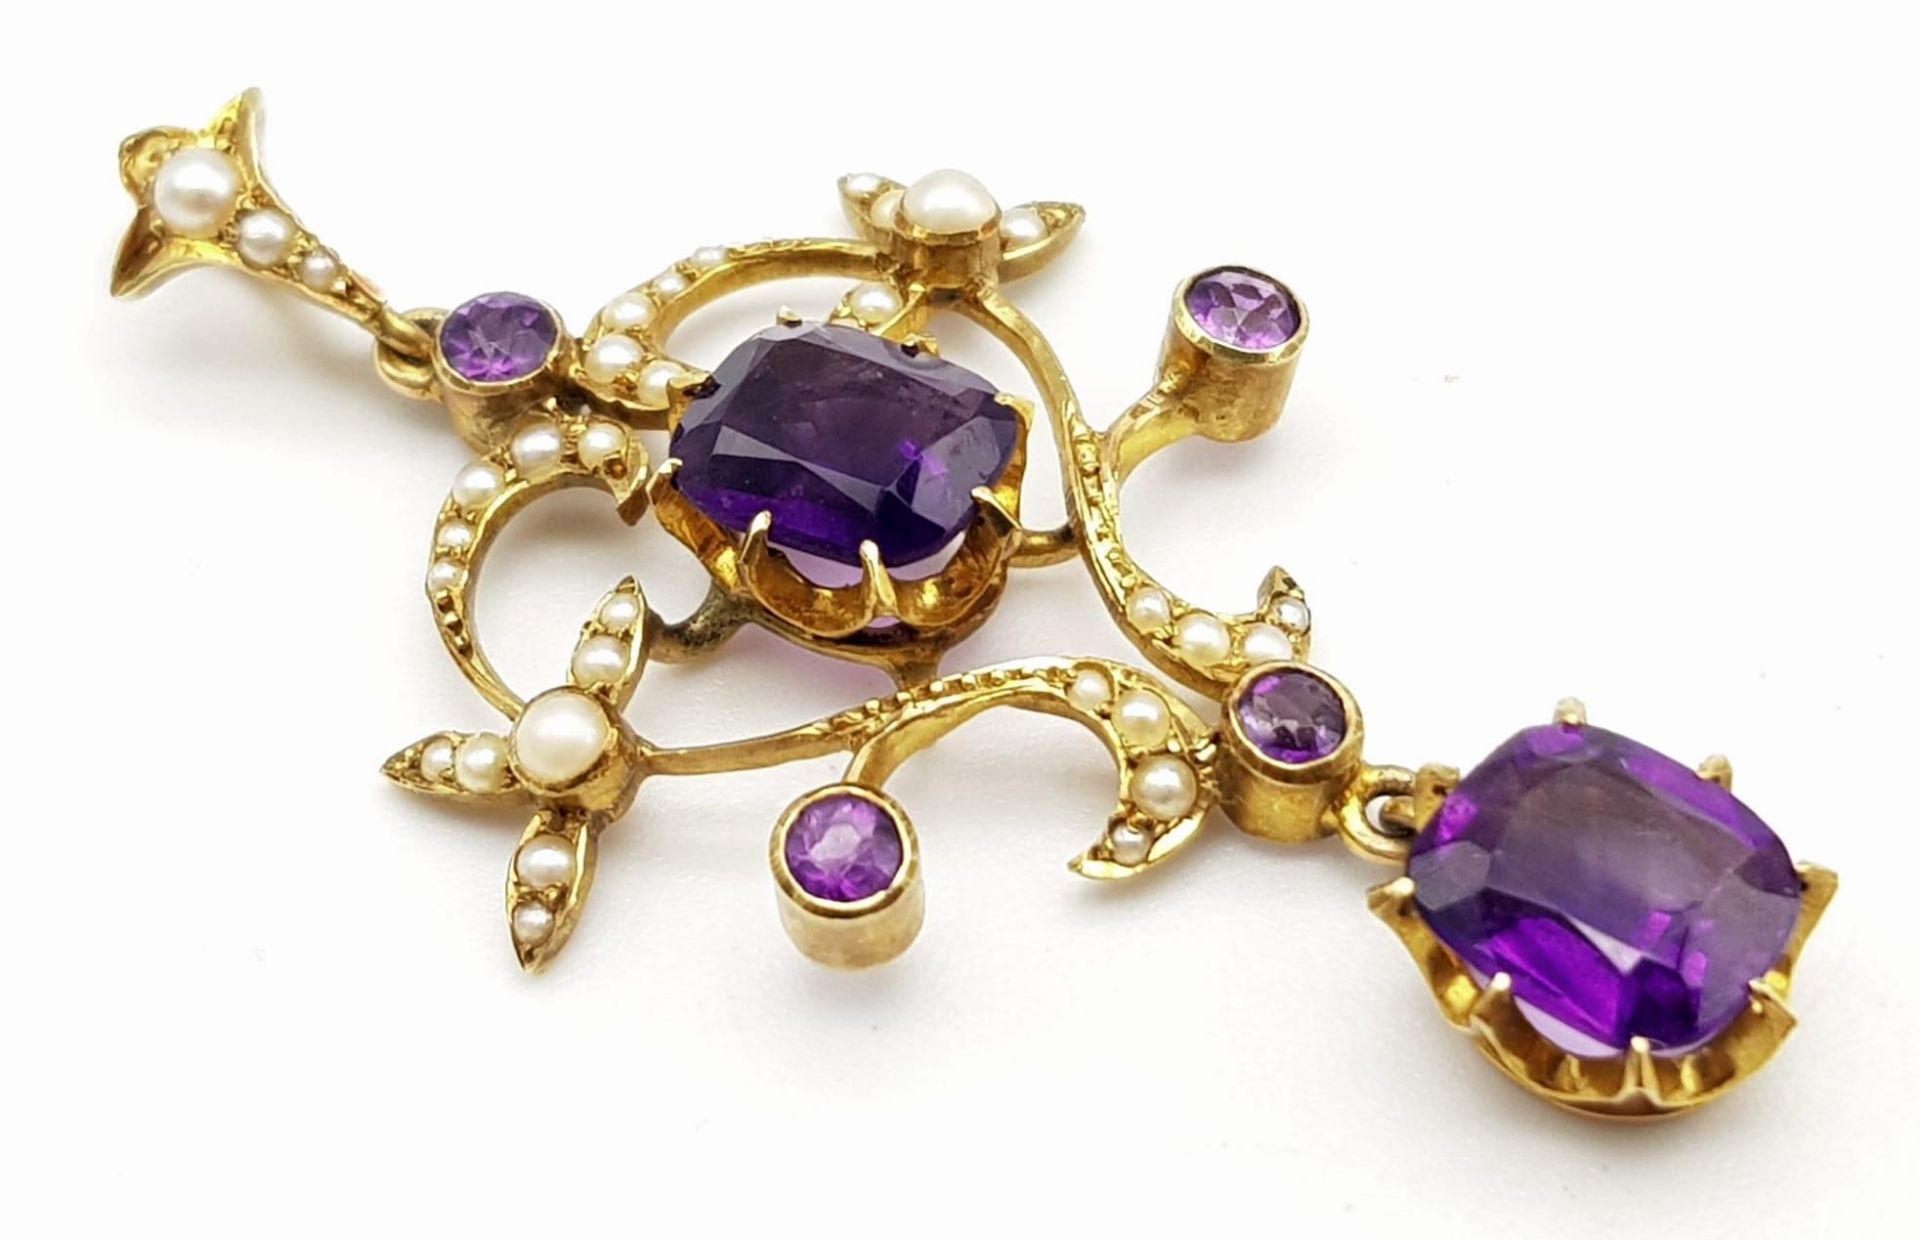 An ART NOUVEAU 9 K yellow gold pendant with vivid coloured amethysts and natural seed pearls, - Image 3 of 7